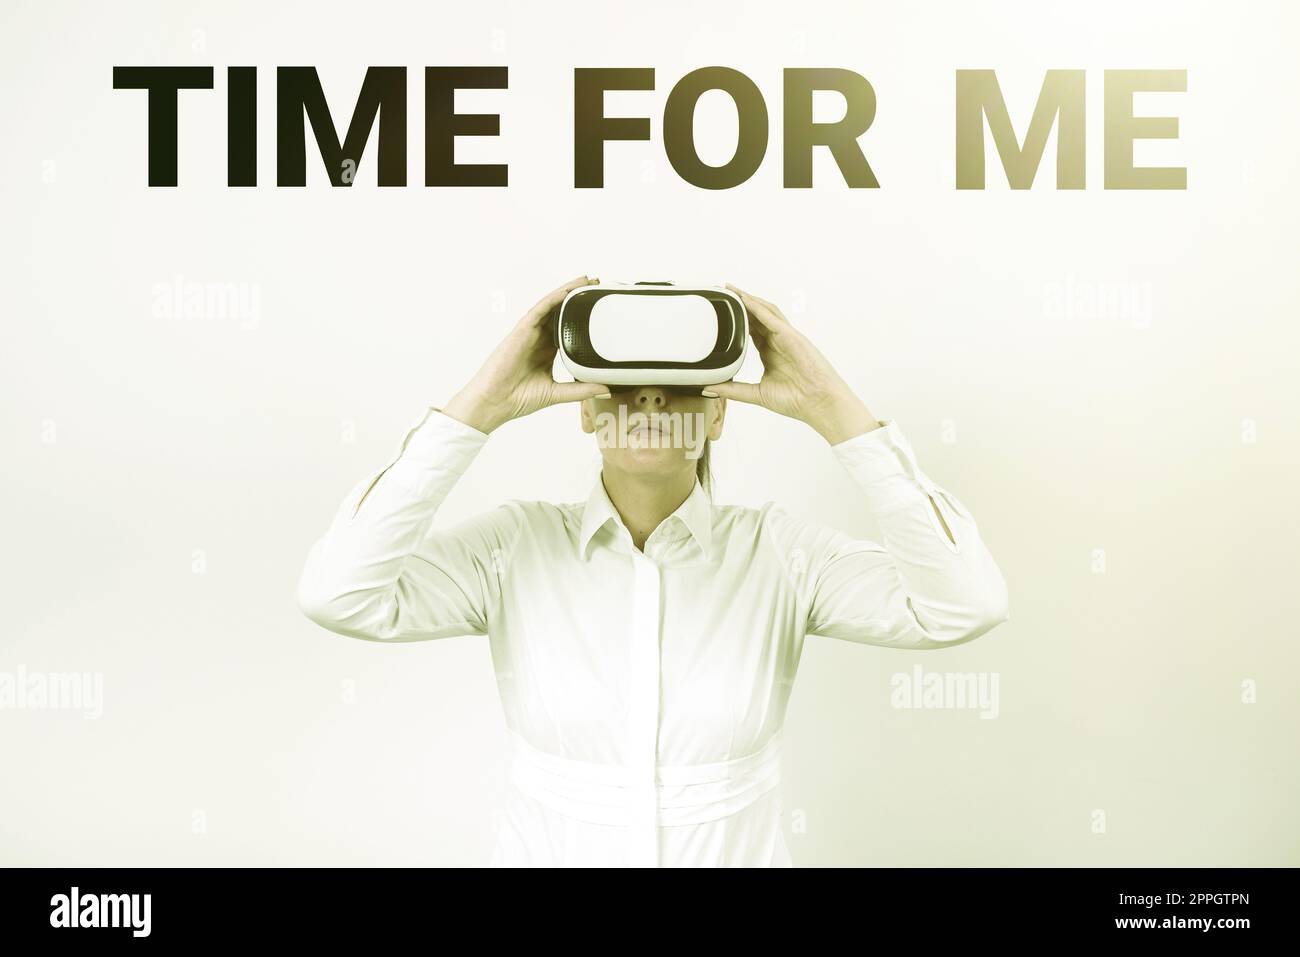 Text showing inspiration Time For Me. Internet Concept I will take a moment to be with myself Meditate Relax Happiness Stock Photo